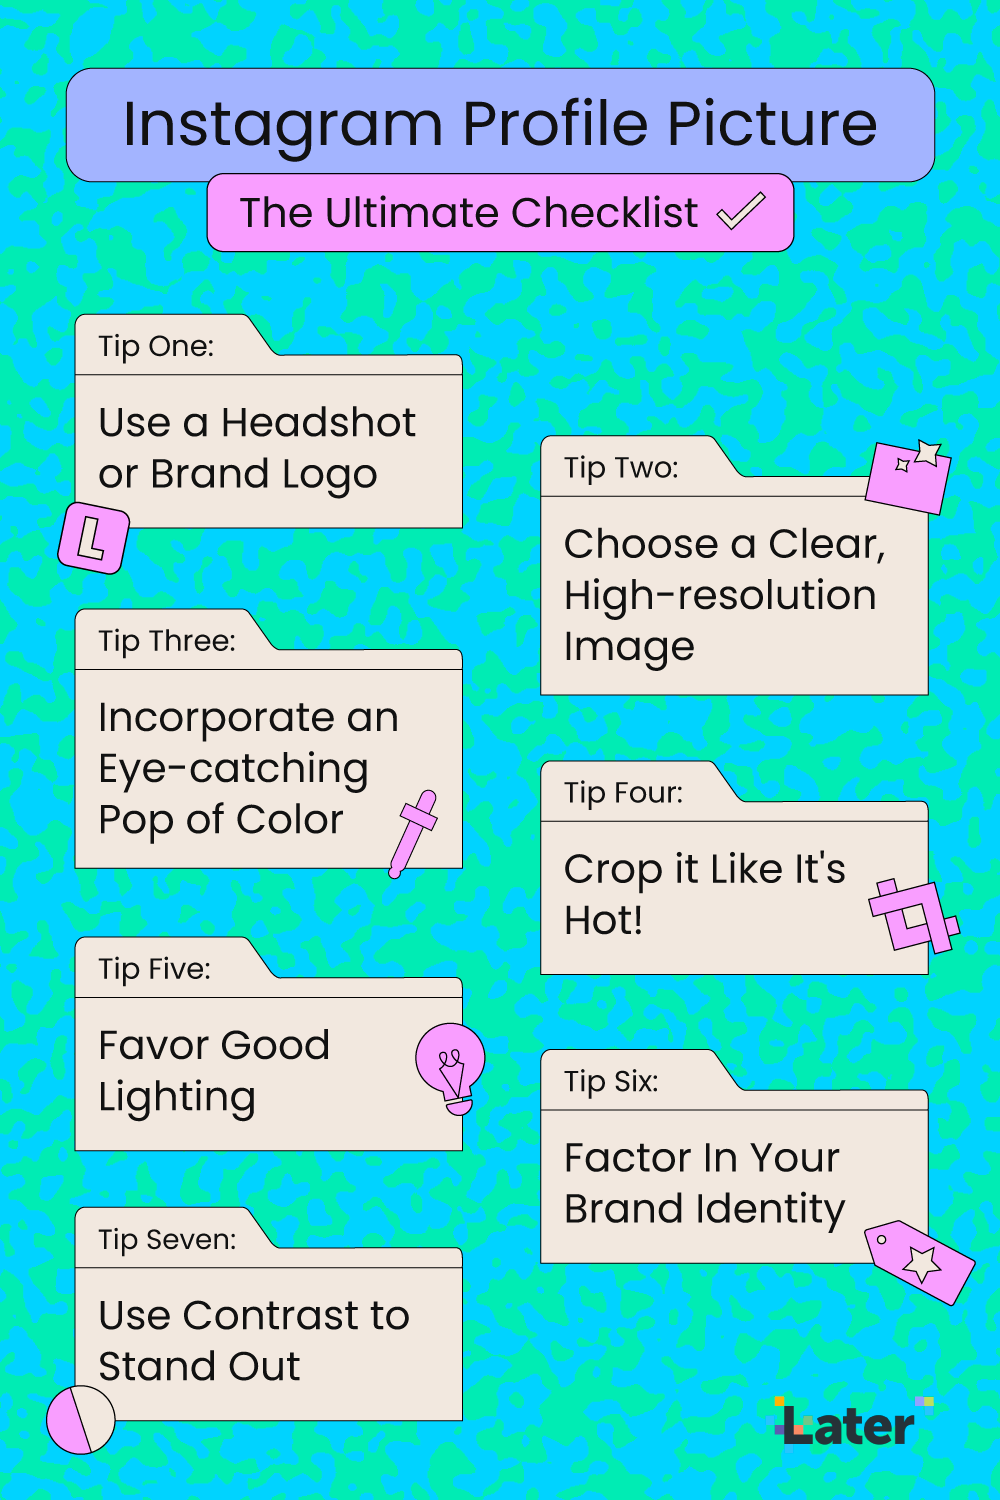 infographic of the top 7 tips to choose the best Instagram profile picture